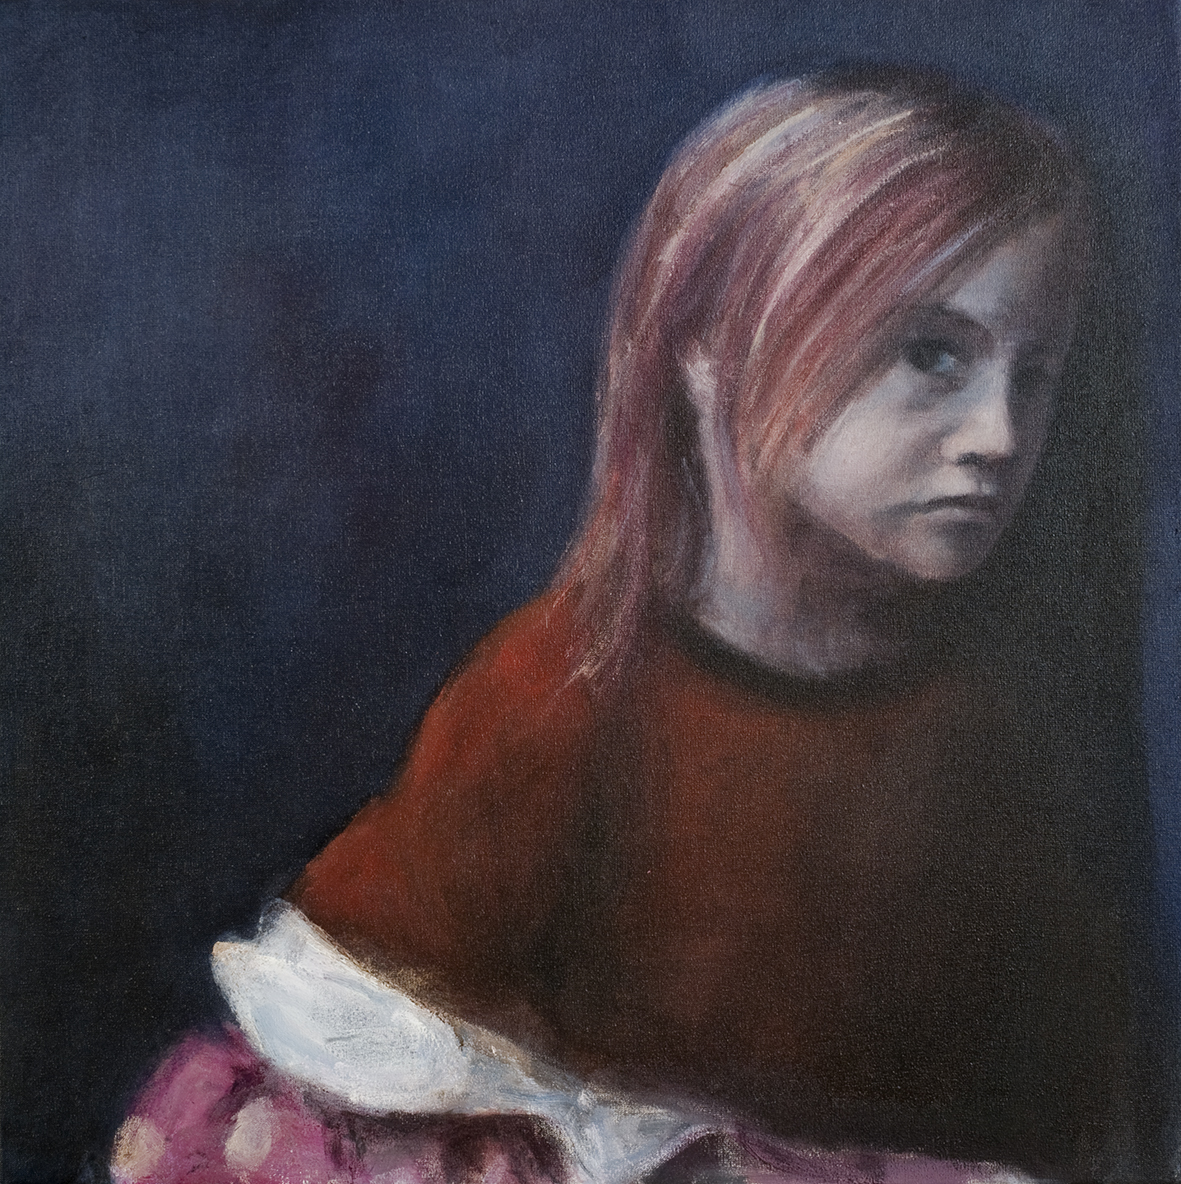   Girl after the masquerade  Oil on canvas 50x50 cm 2008 